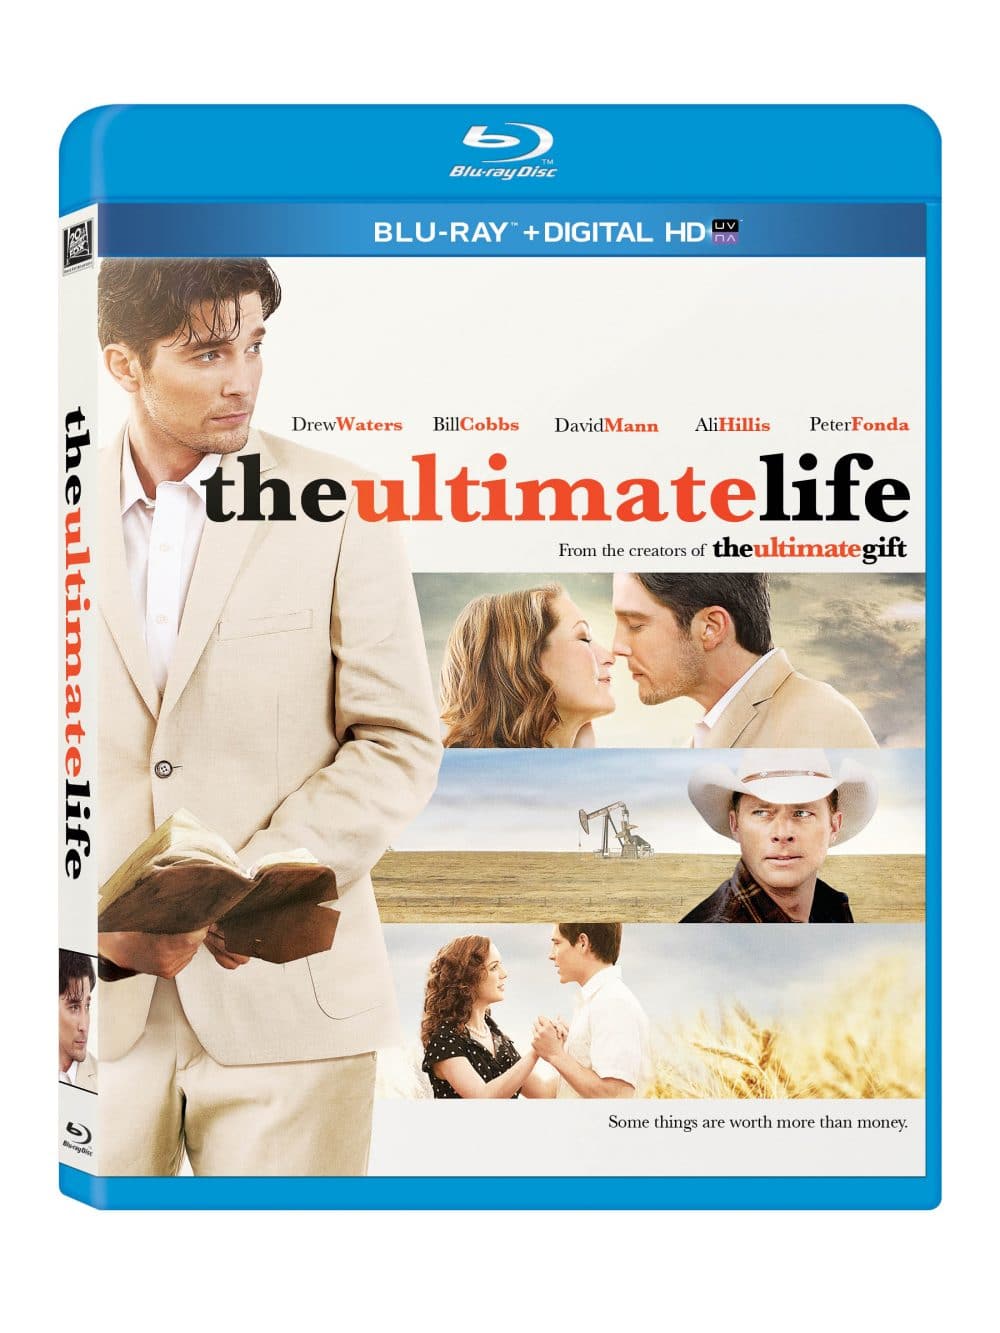 The Ultimate Life Movie Review